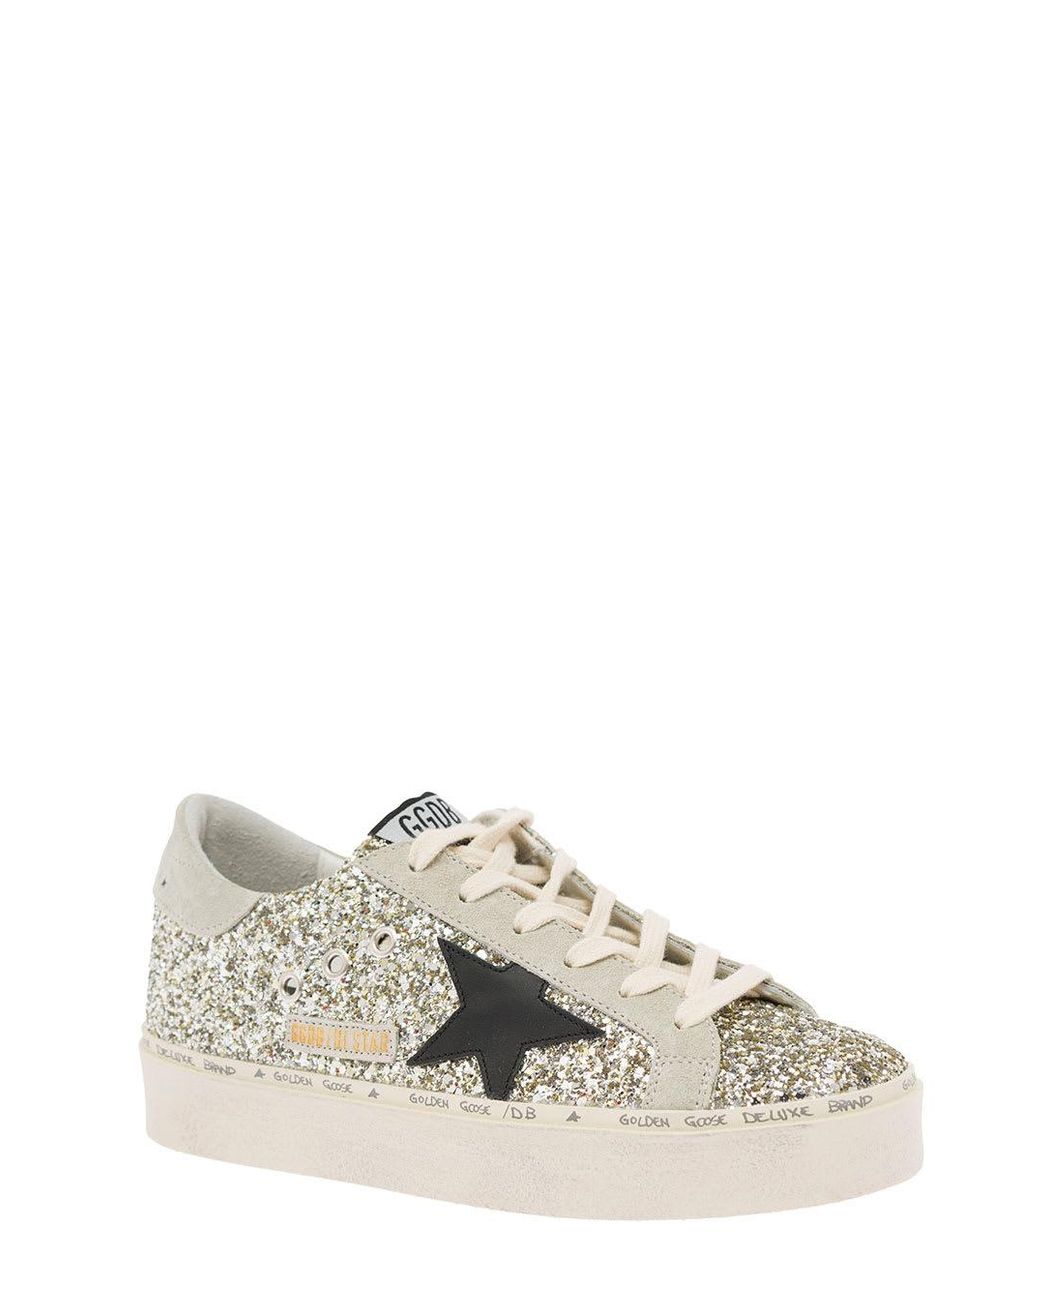 Golden Goose Woman's Hi Star Glittered Leather Sneakers | Lyst